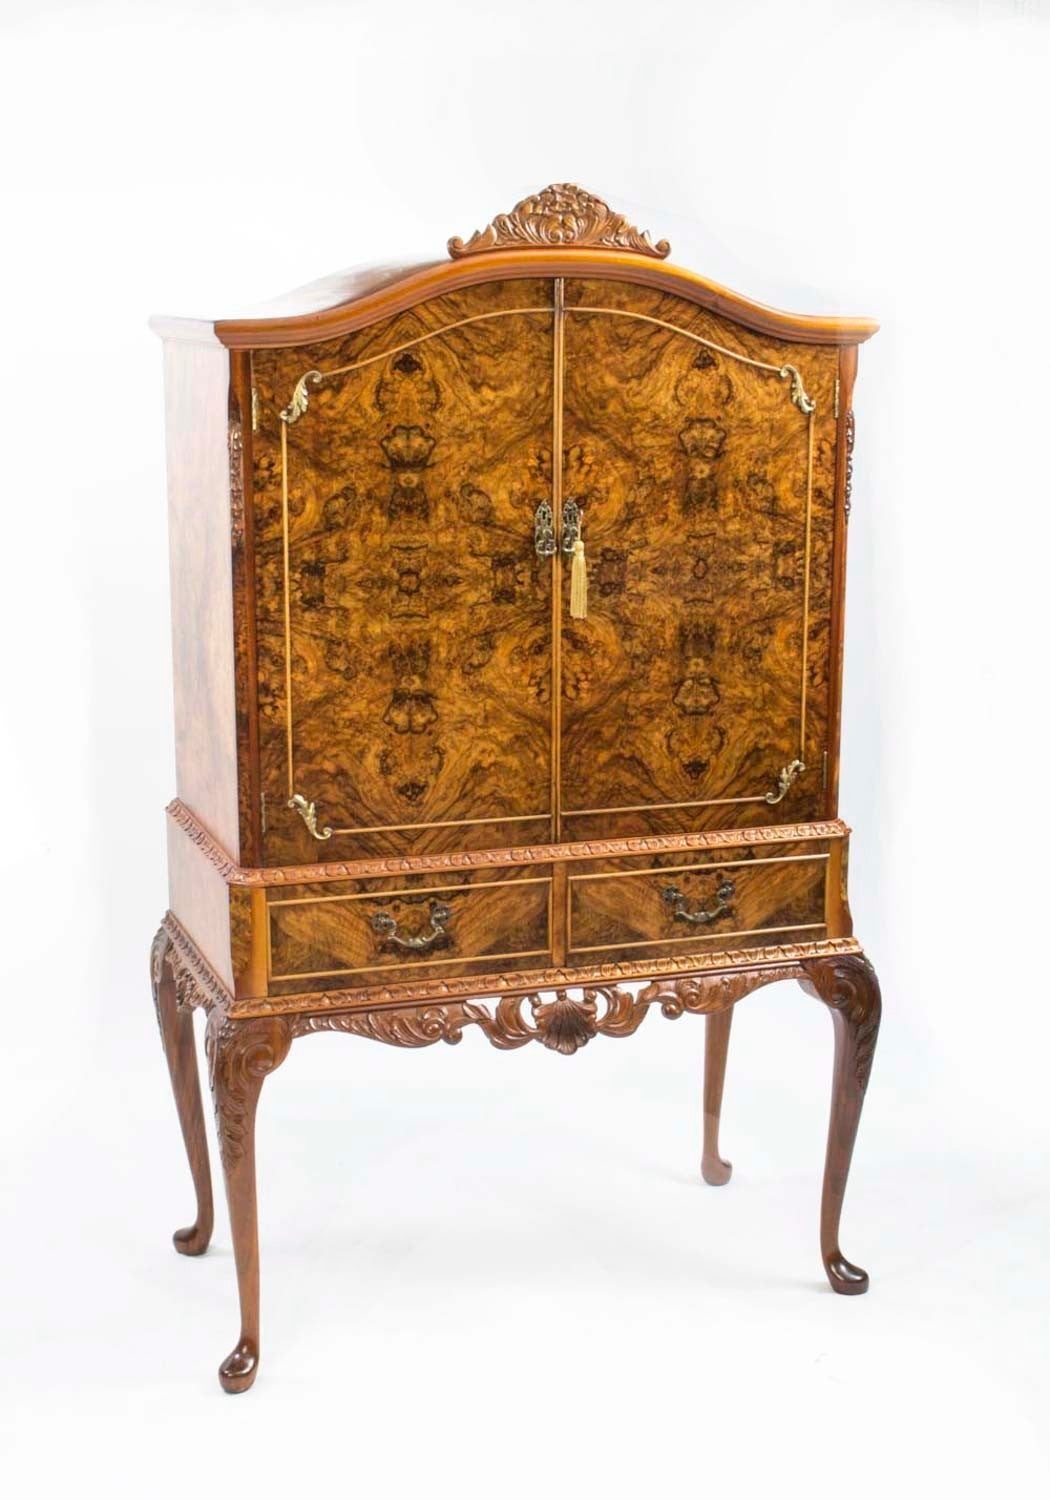 This is a fantastic vintage burr walnut cocktail cabinet with wonderful hand carved decoration dating from the mid 20th Century. 

The doors open to reveal a stunning fitted mirrored interior with a glass shelf, a useful pull out slide and a tray